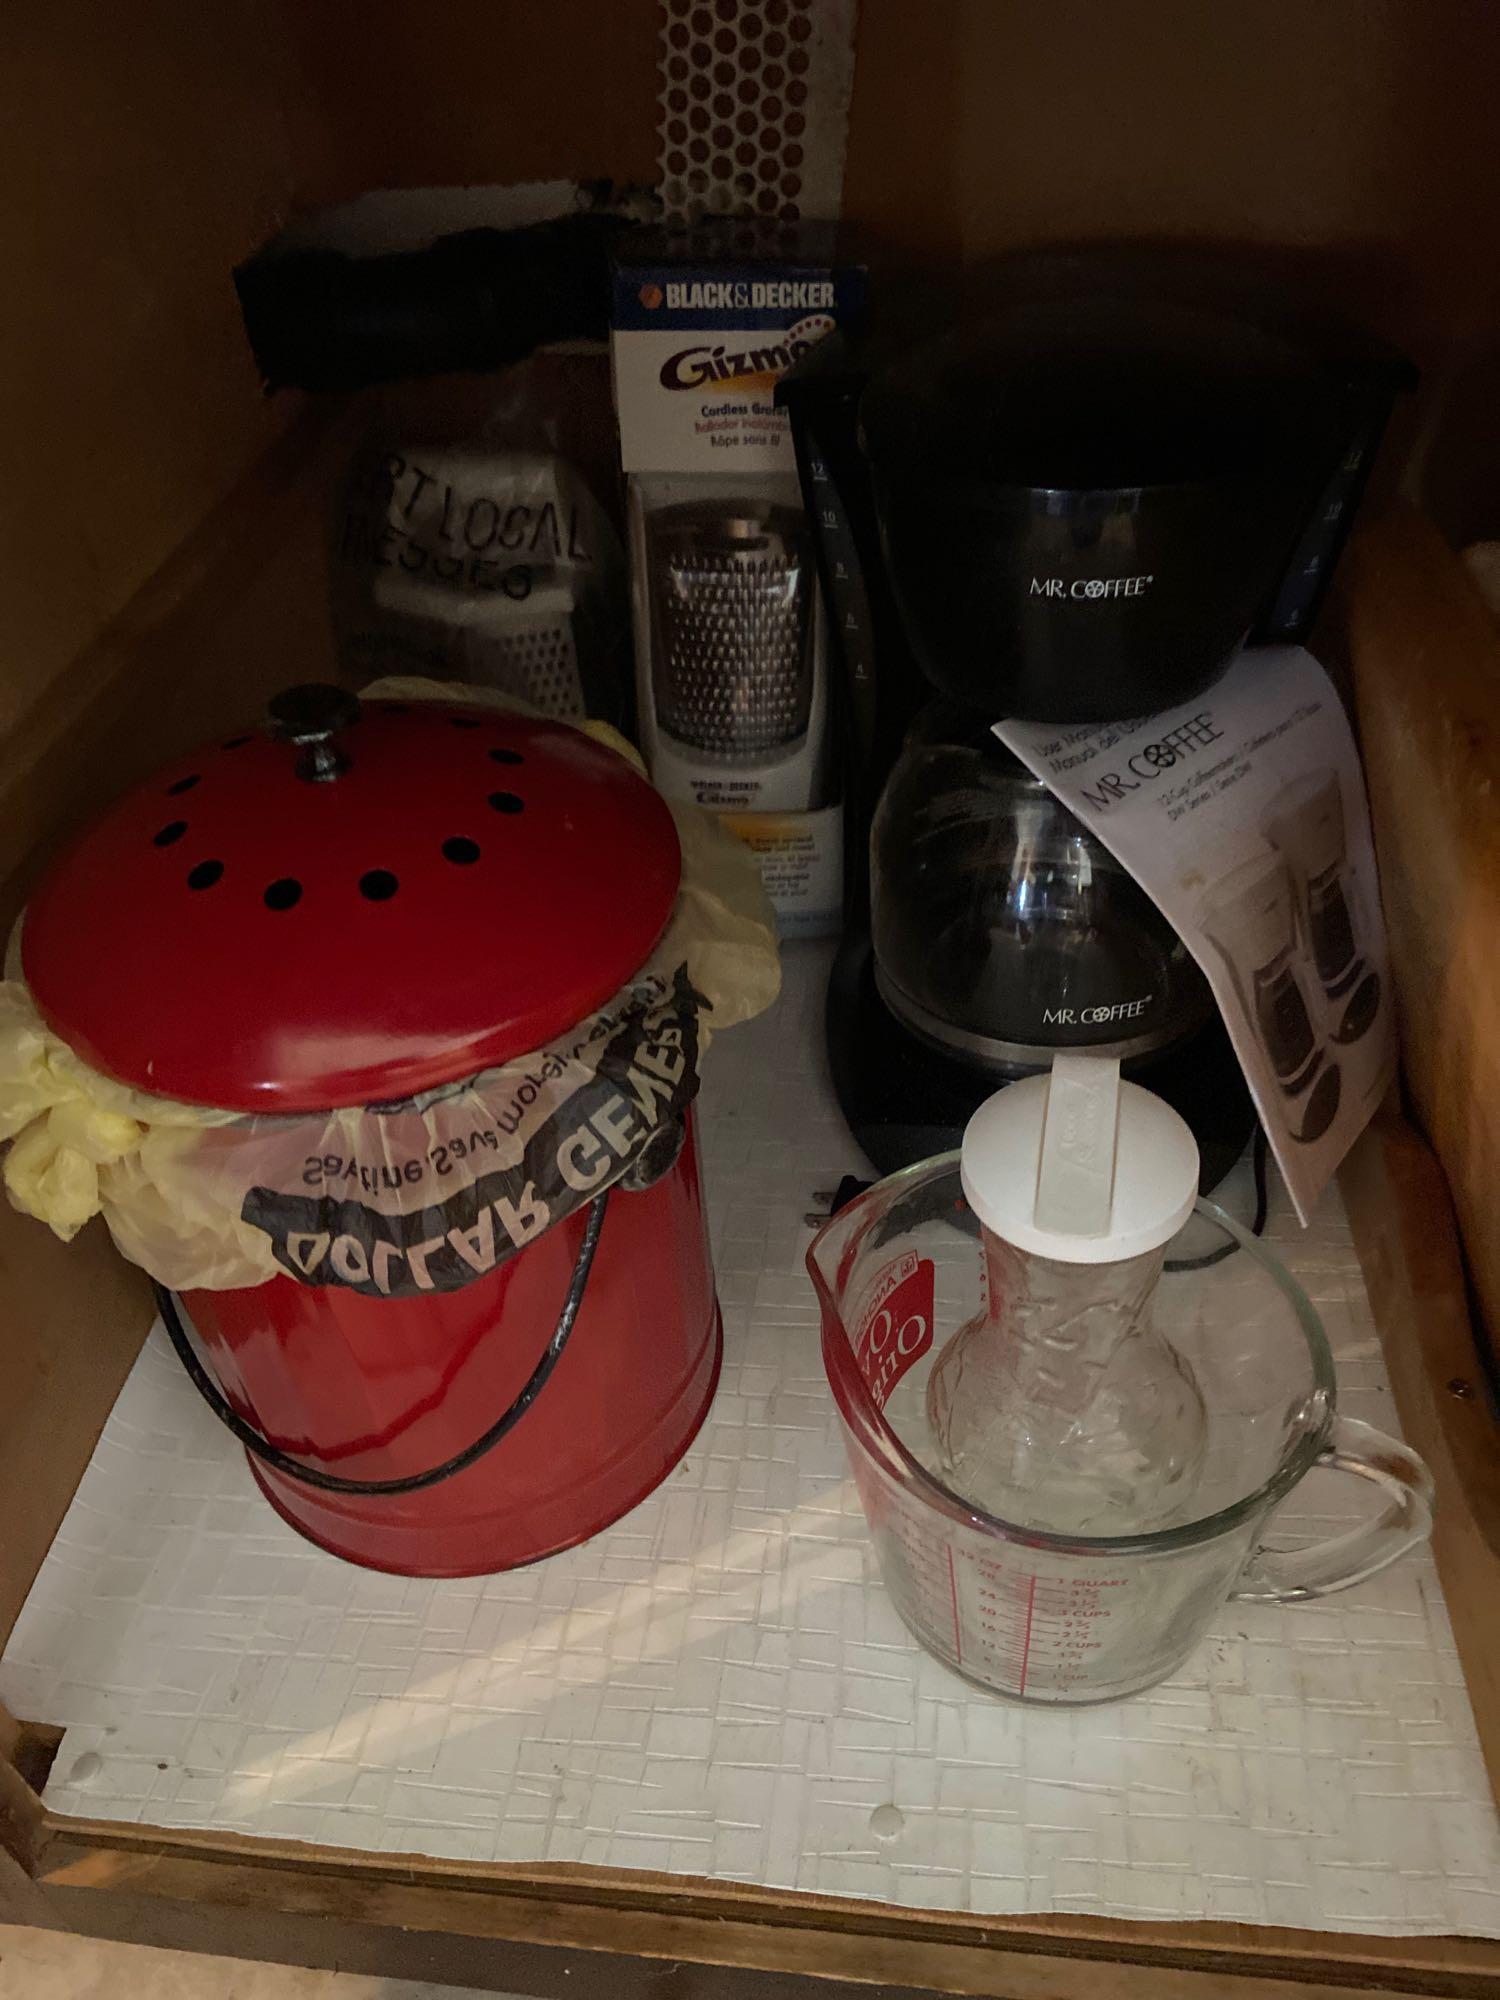 Contents of Bottom Kitchen Cabinets